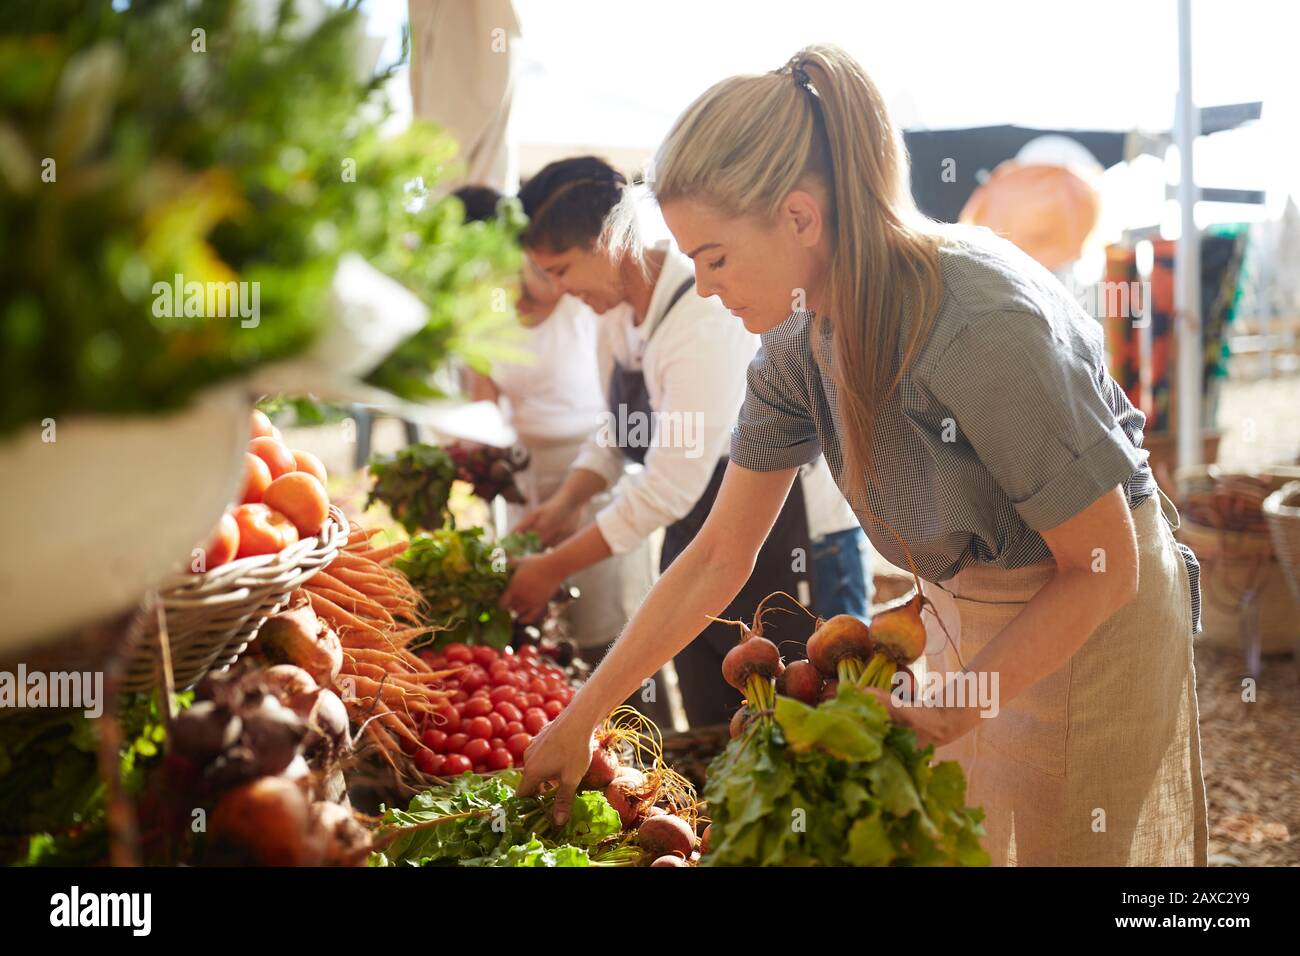 Woman working, arranging produce at farmer’s market Stock Photo